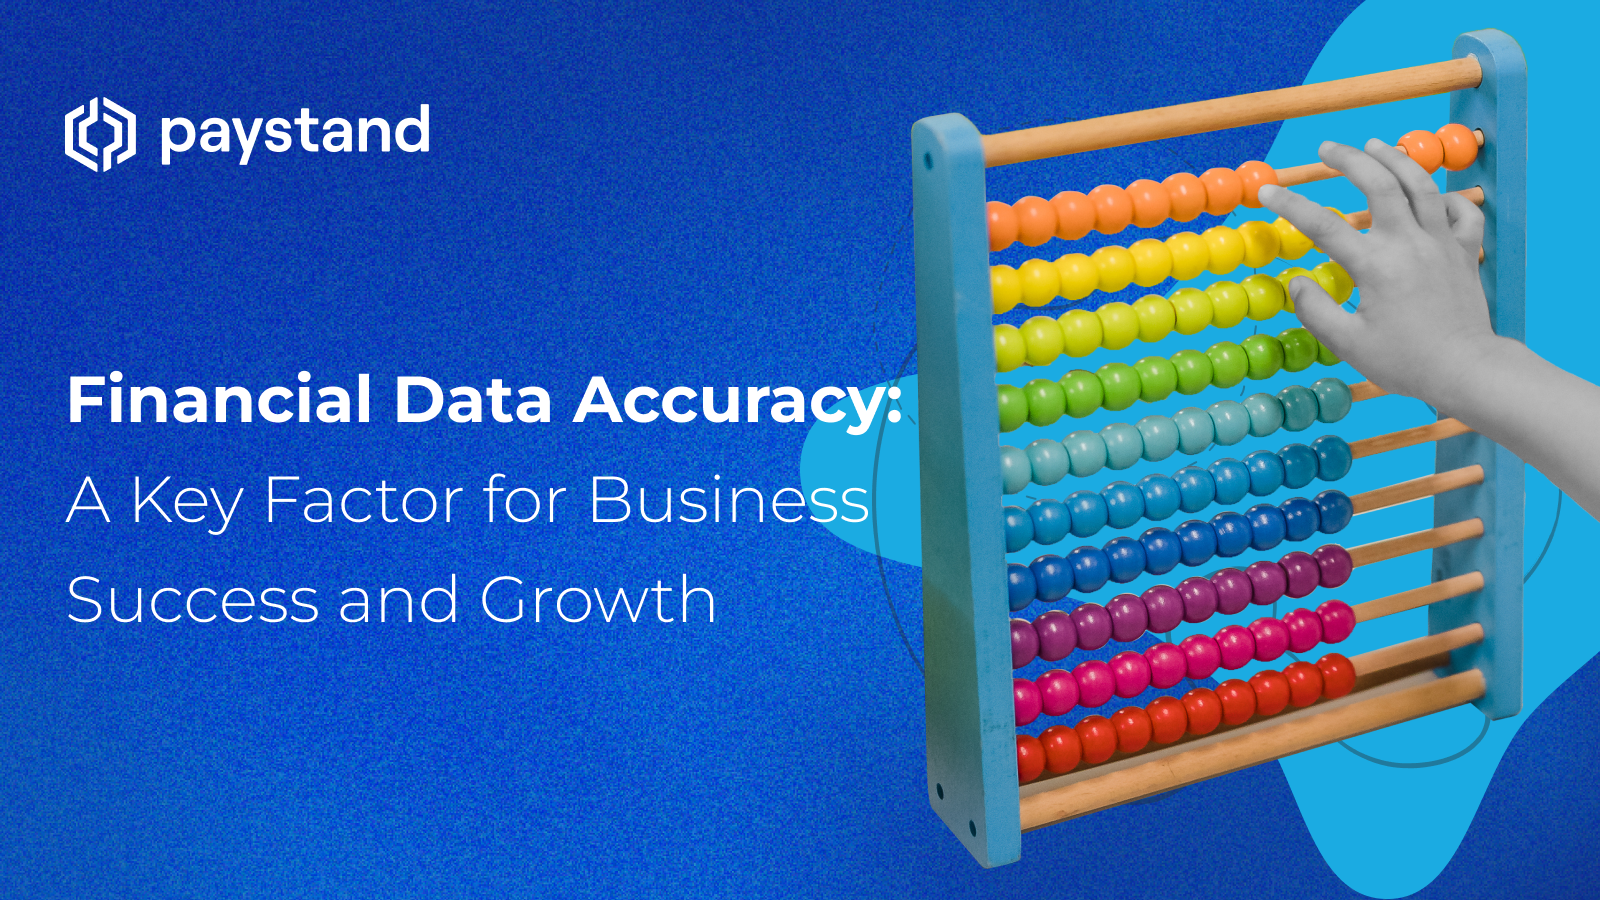 Financial Data Accuracy: A Key Factor for Business Success and Growth